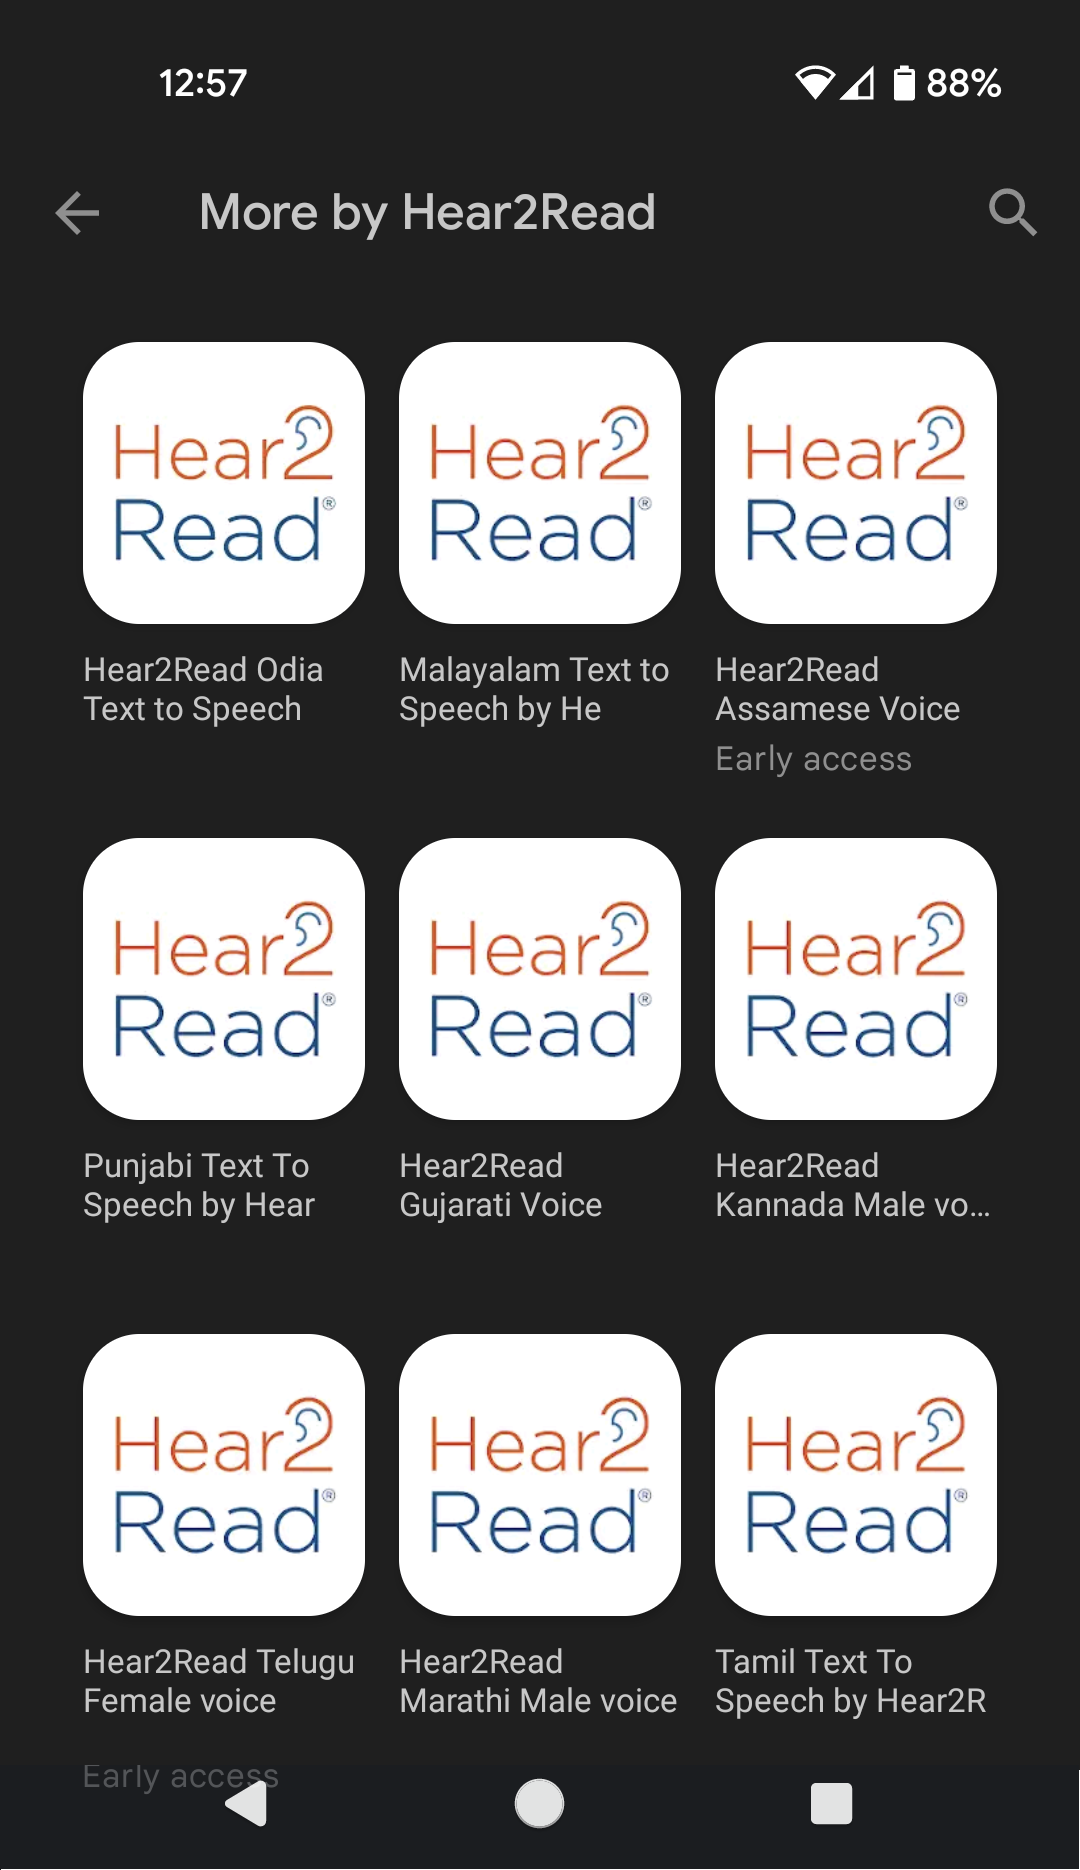 Hear2Read Indian Text To Speech apps on an Android phone